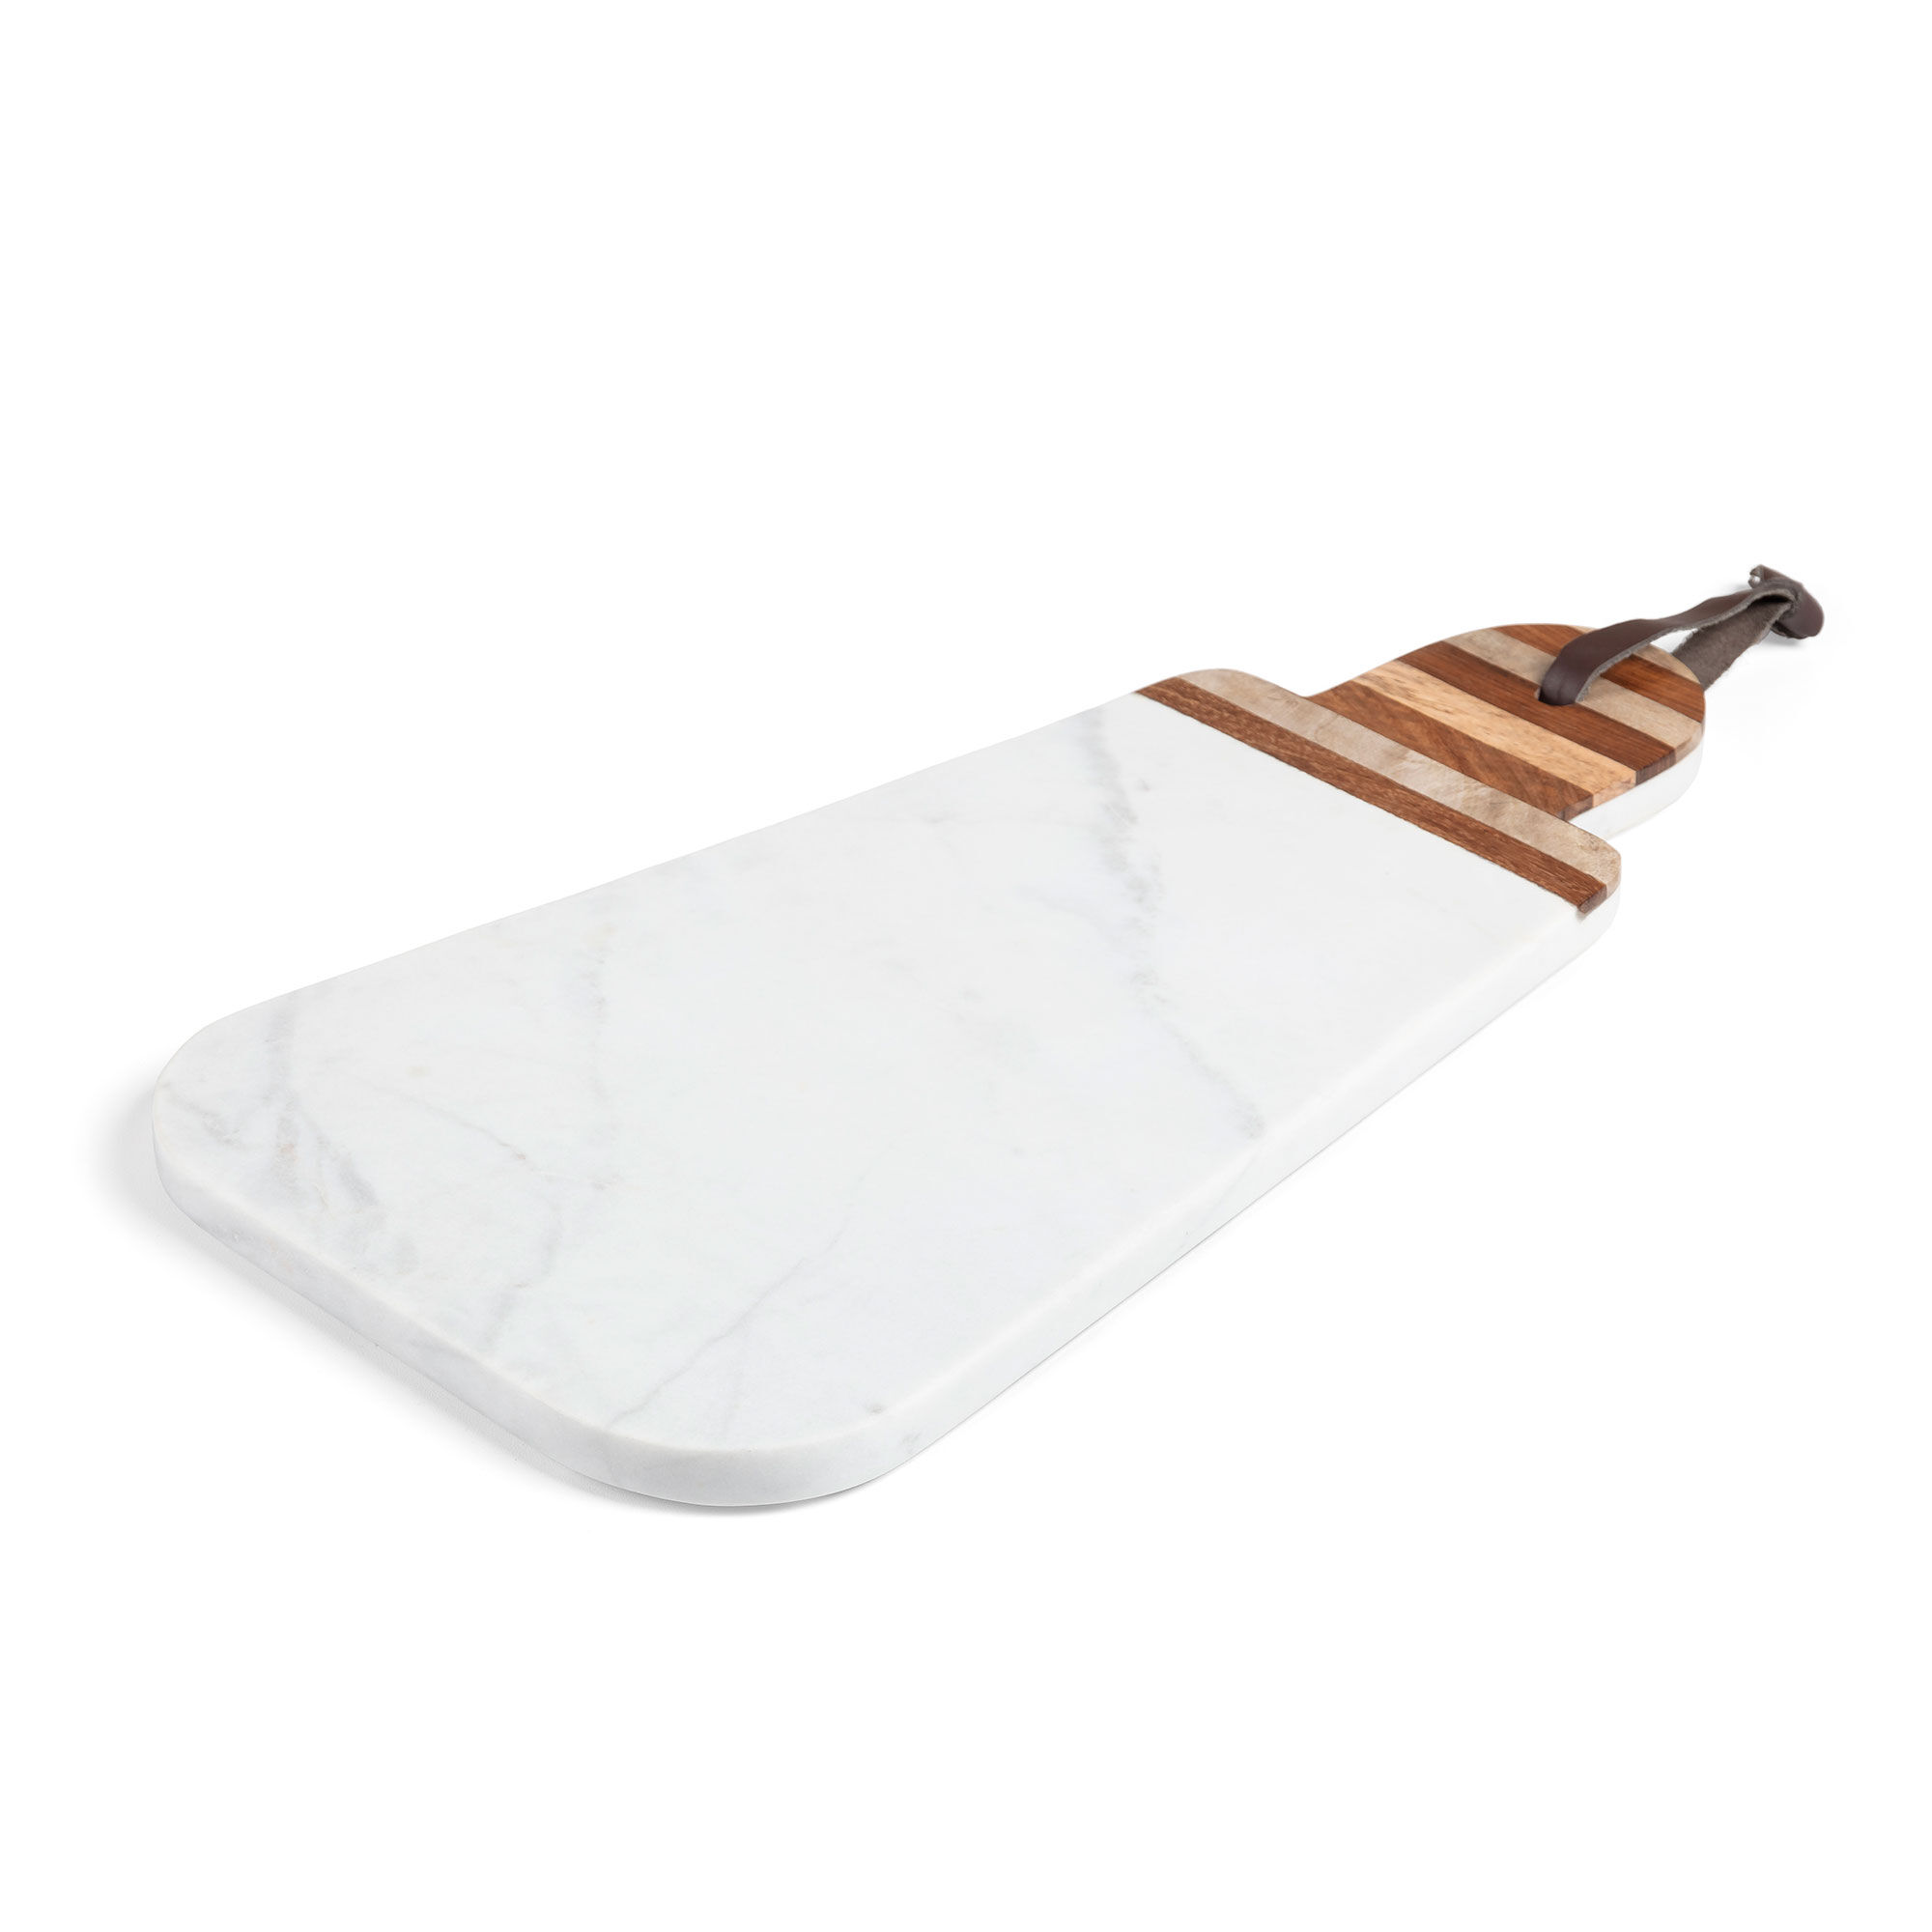 Kave Home Bryant oval triangular cutting board white marble handle